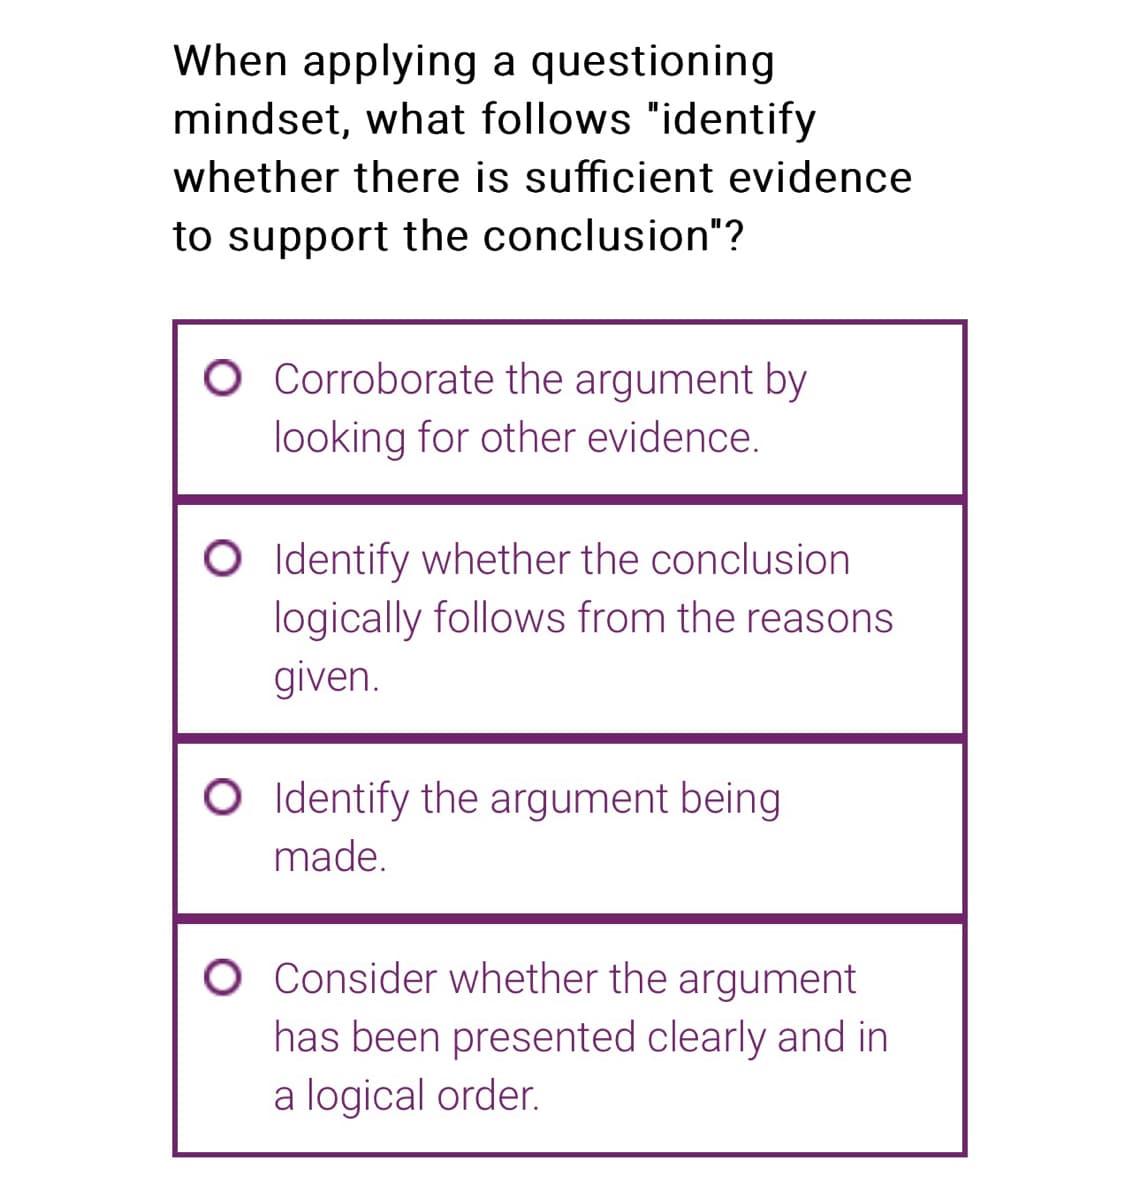 When applying a questioning
mindset, what follows "identify
whether there is sufficient evidence
to support the conclusion"?
O Corroborate the argument by
looking for other evidence.
O Identify whether the conclusion
logically follows from the reasons
given.
O Identify the argument being
made.
O Consider whether the argument
has been presented clearly and in
a logical order.